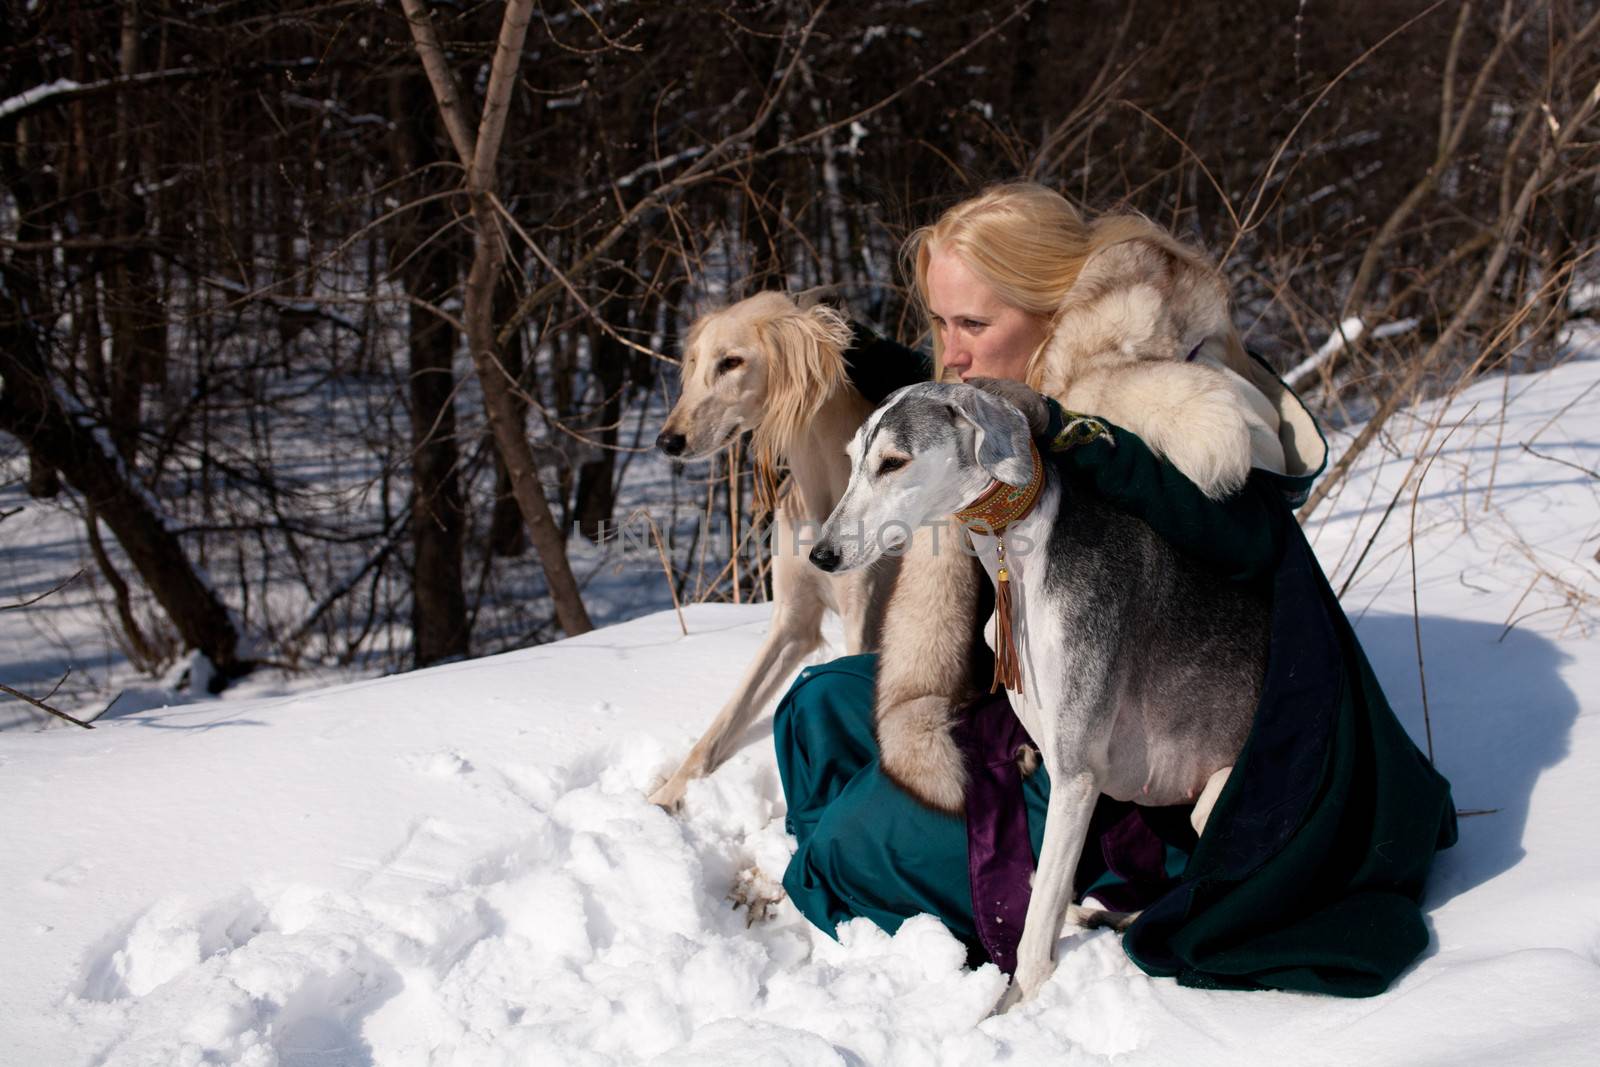 A blonde girl and grey and white salukies on snow
